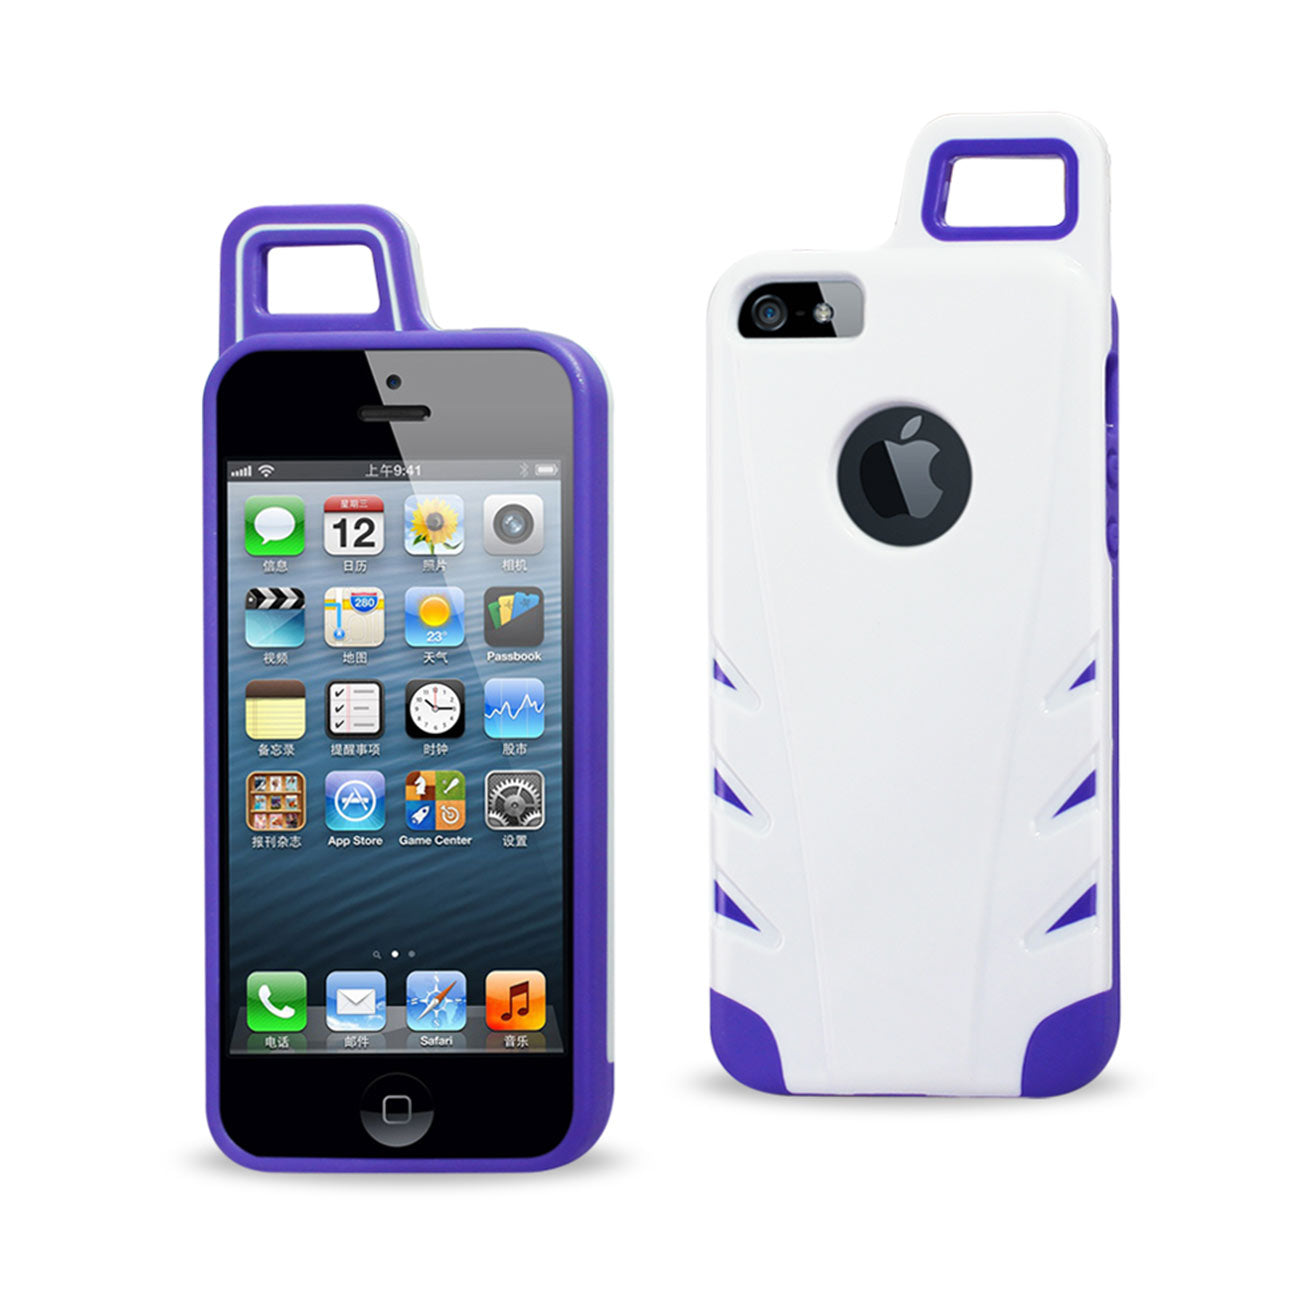 Case Hybrid Drop Proof Workout With Hook iPhone 5/ 5S/ SE White Purple Color